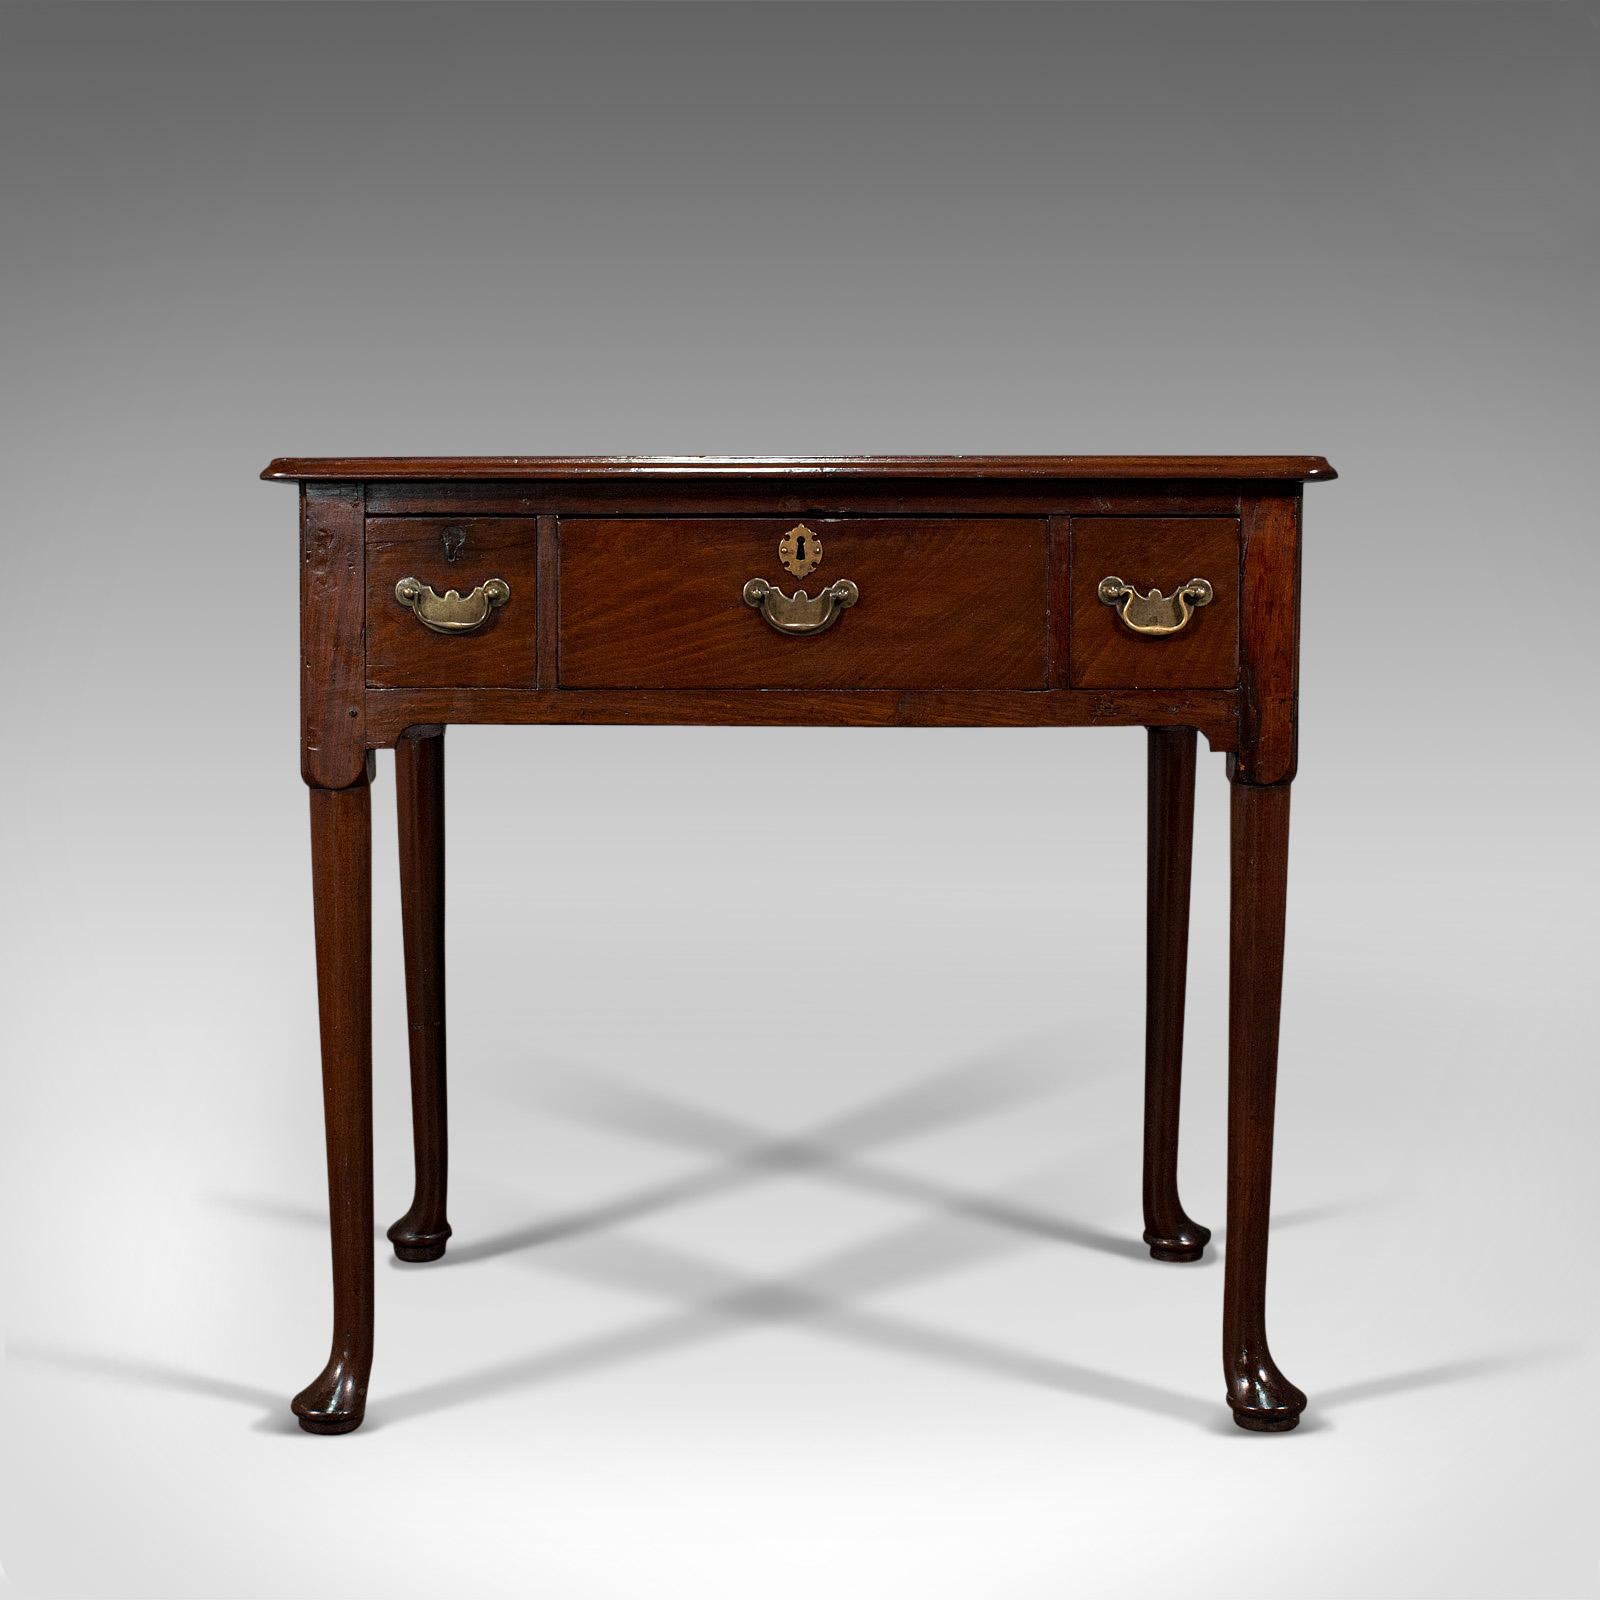 This is a fine antique lowboy. An English, mahogany side or serving table, dating to the Georgian period, circa 1780.

Delightful finish and proportion from the heart of the Georgian period
Displaying a desirable aged patina and in good